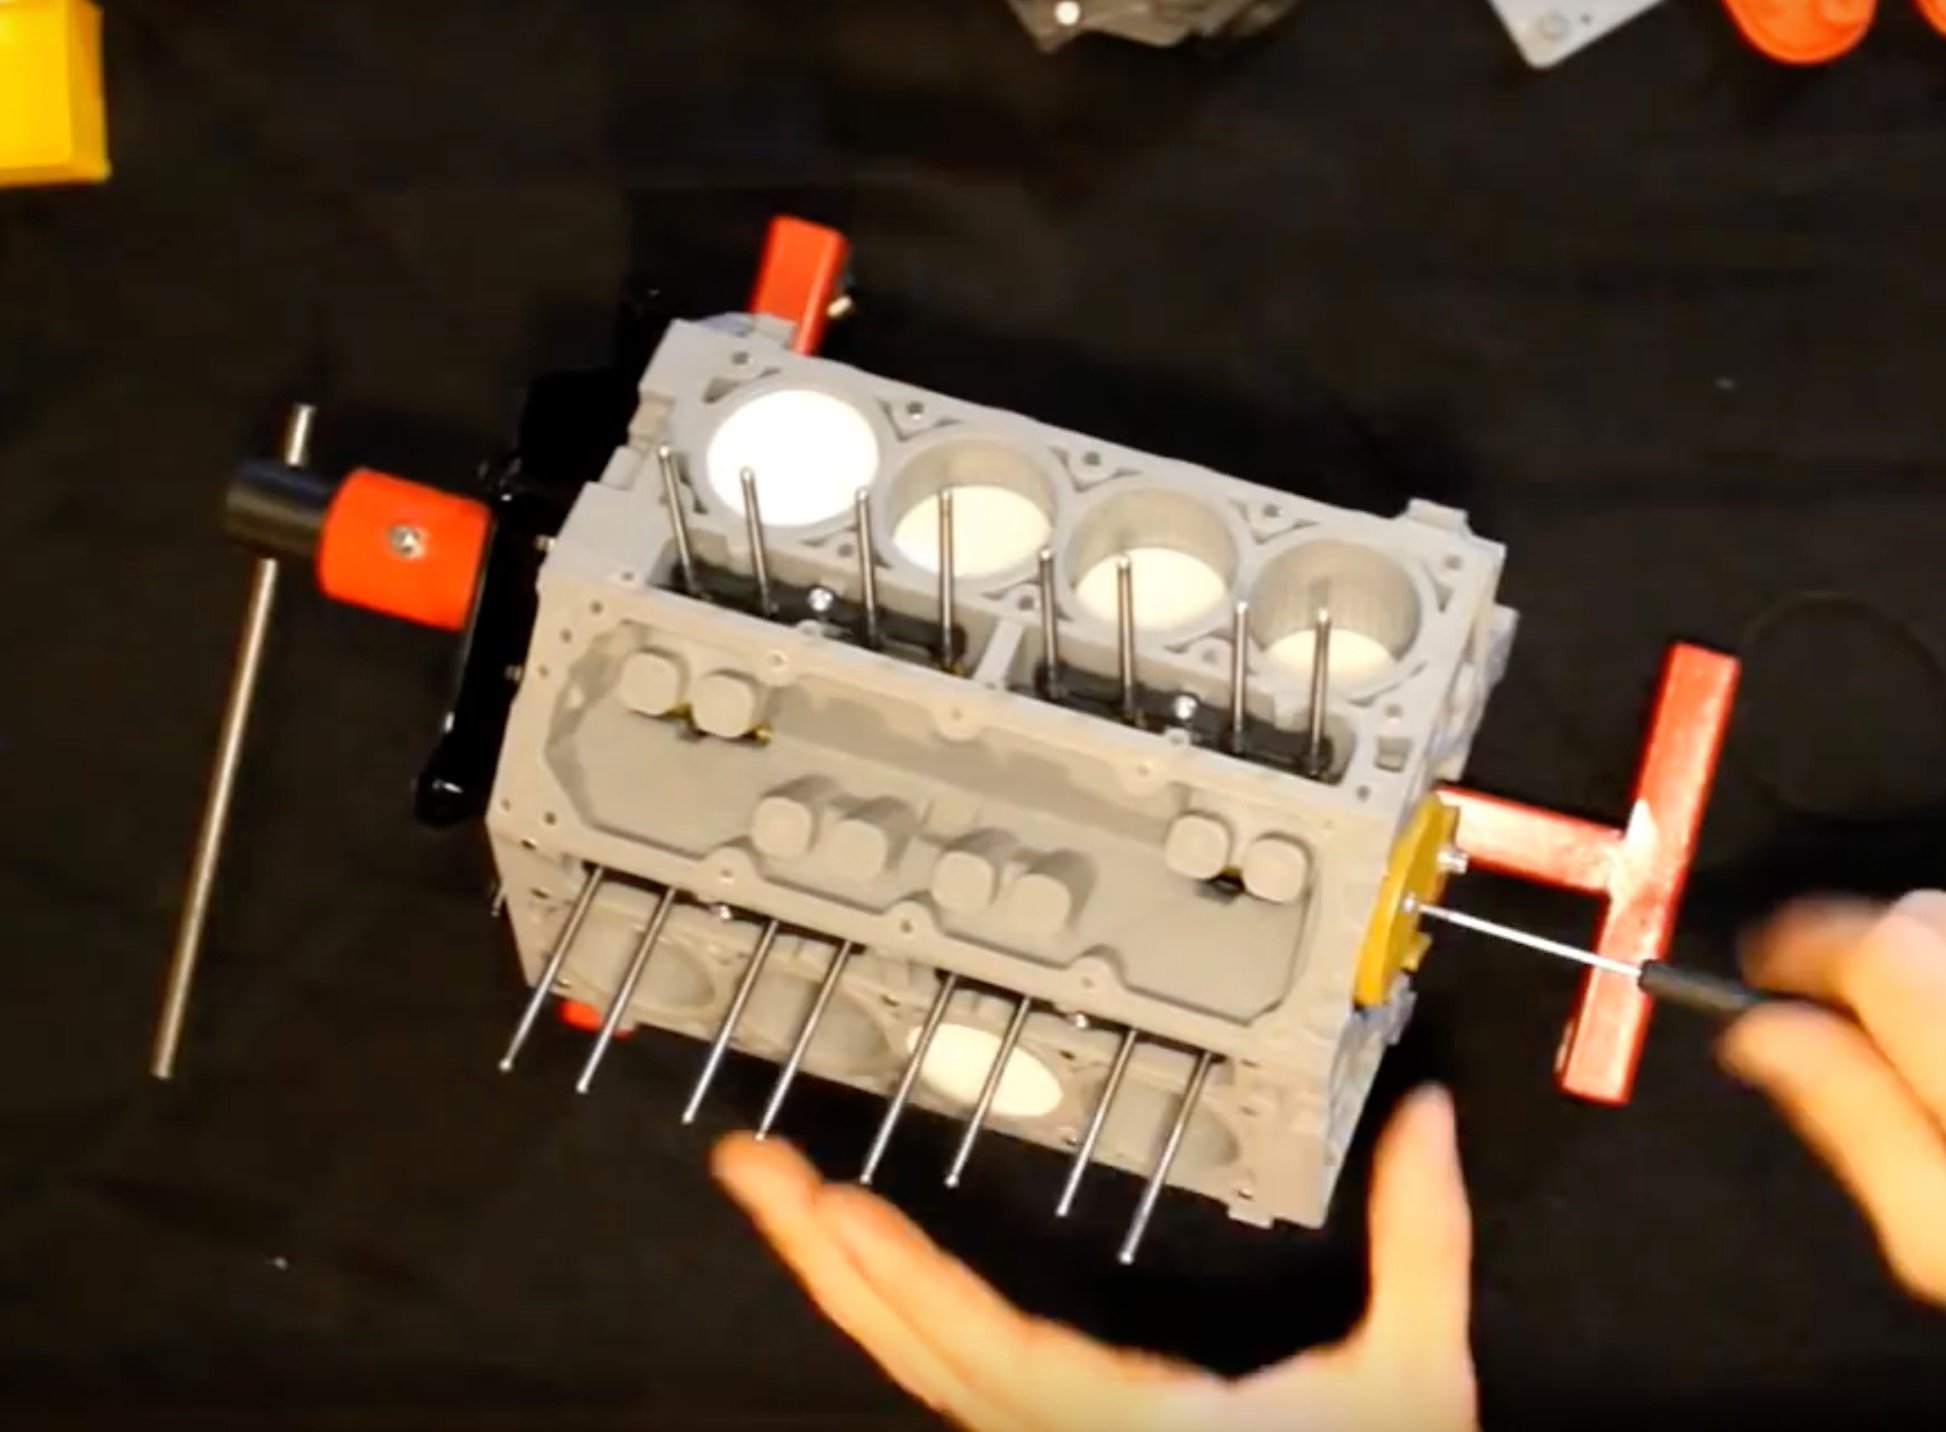  Assembling the 3D printed Chevy Camaro LS3 V8 engine 